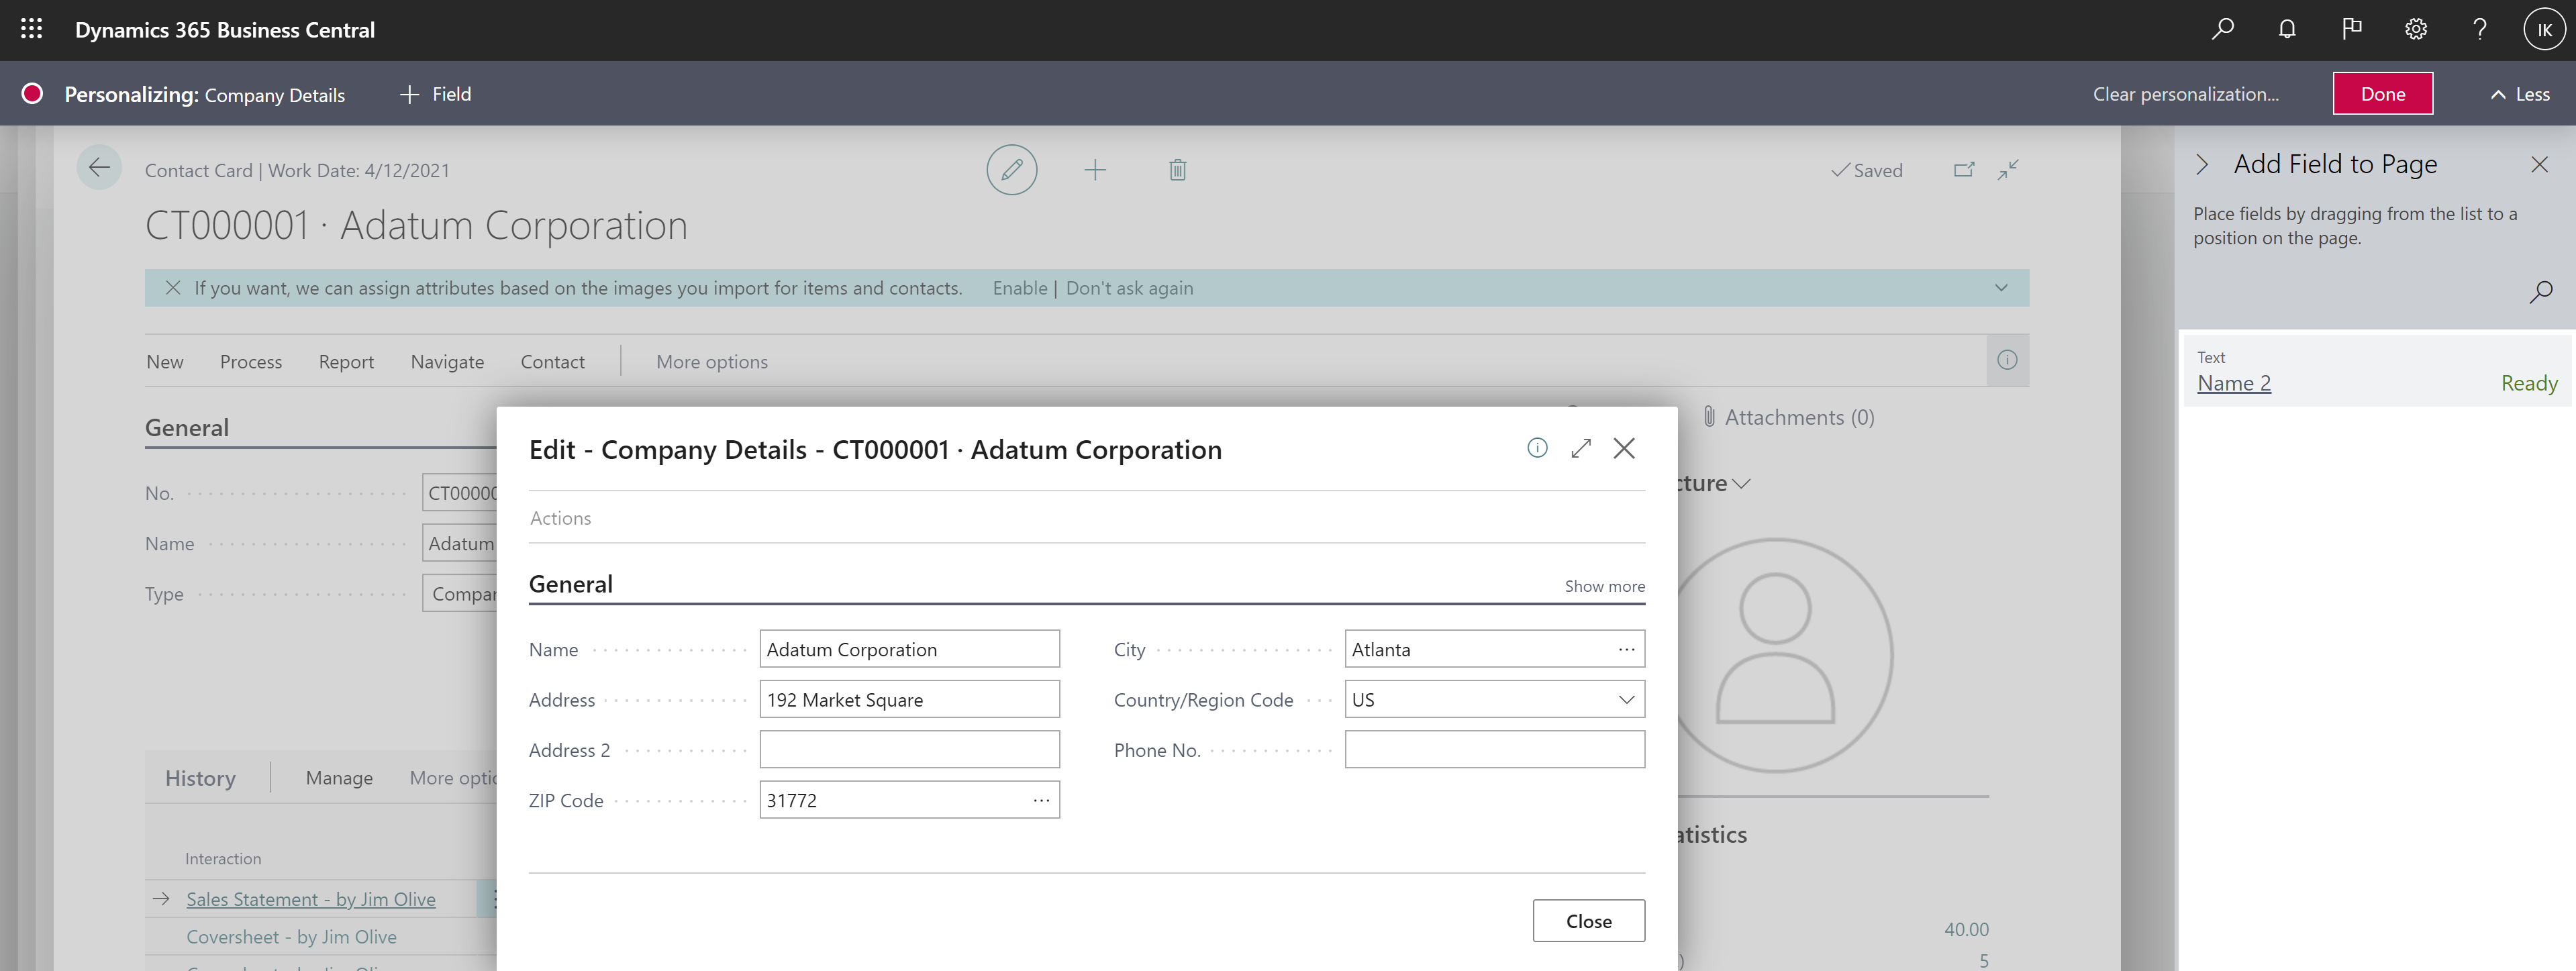 Shows Company Details page with Name 2 in list of available fields to add through personalization.